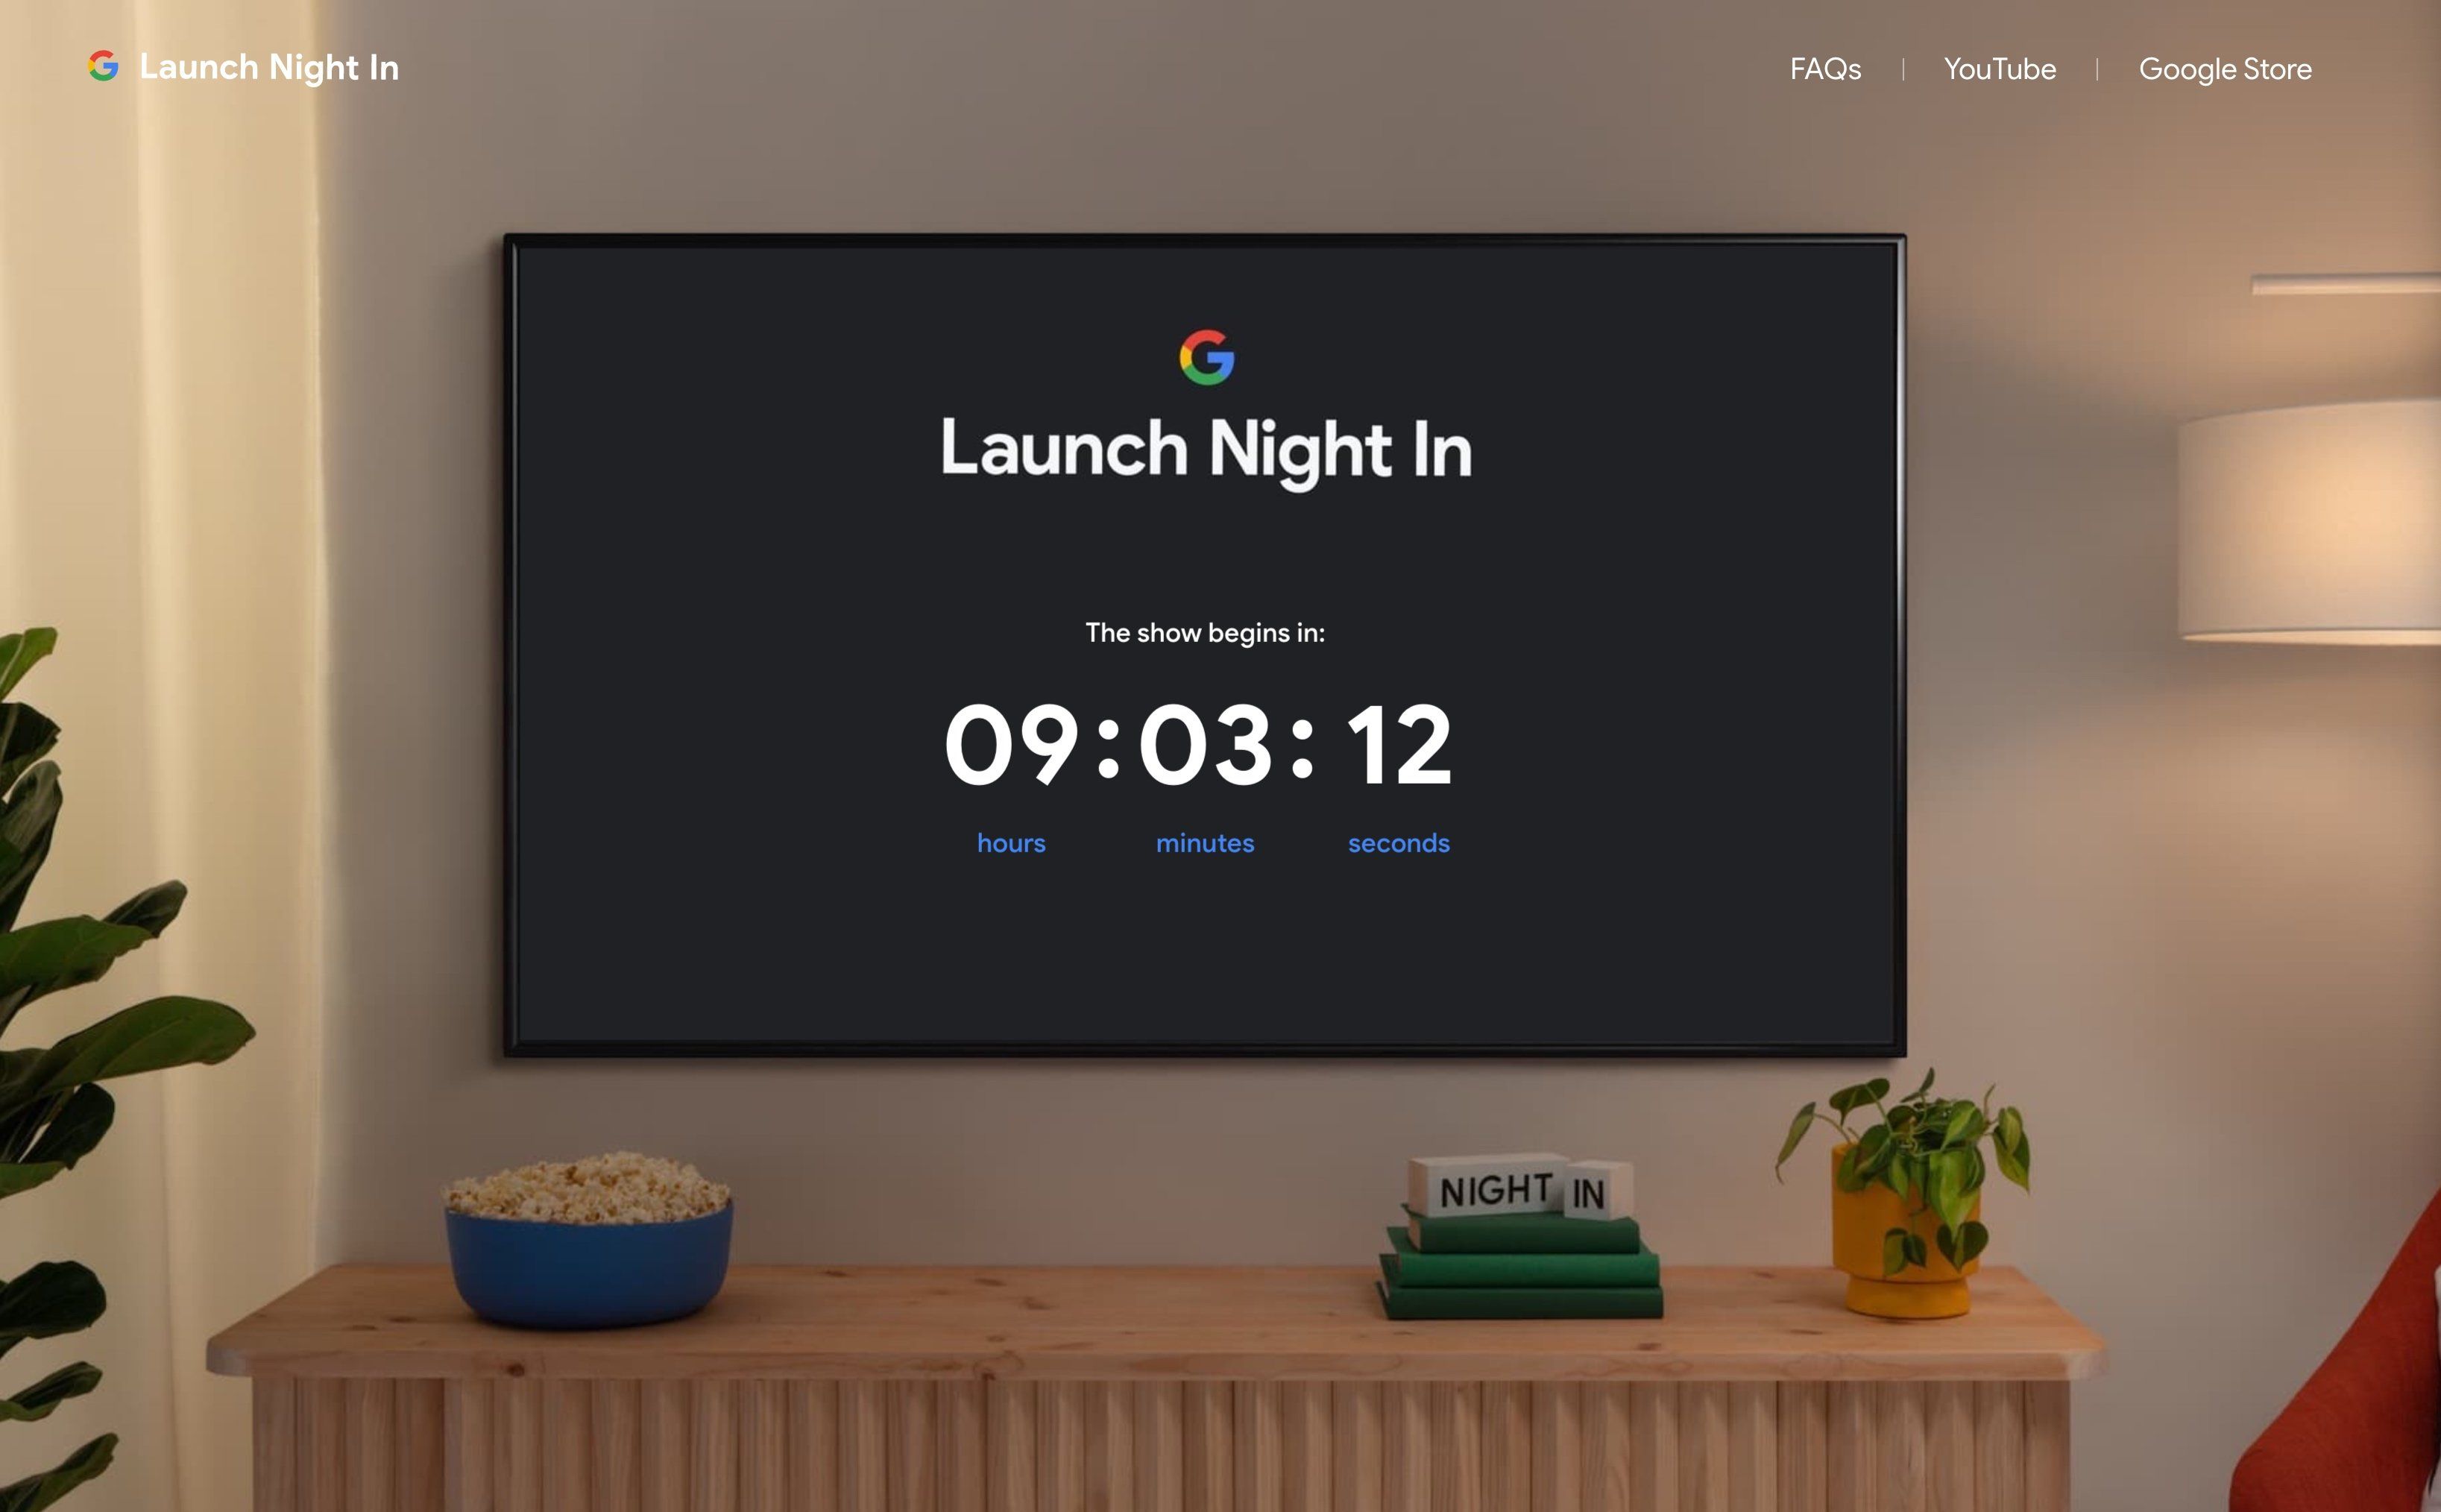 Google Launch Night In event